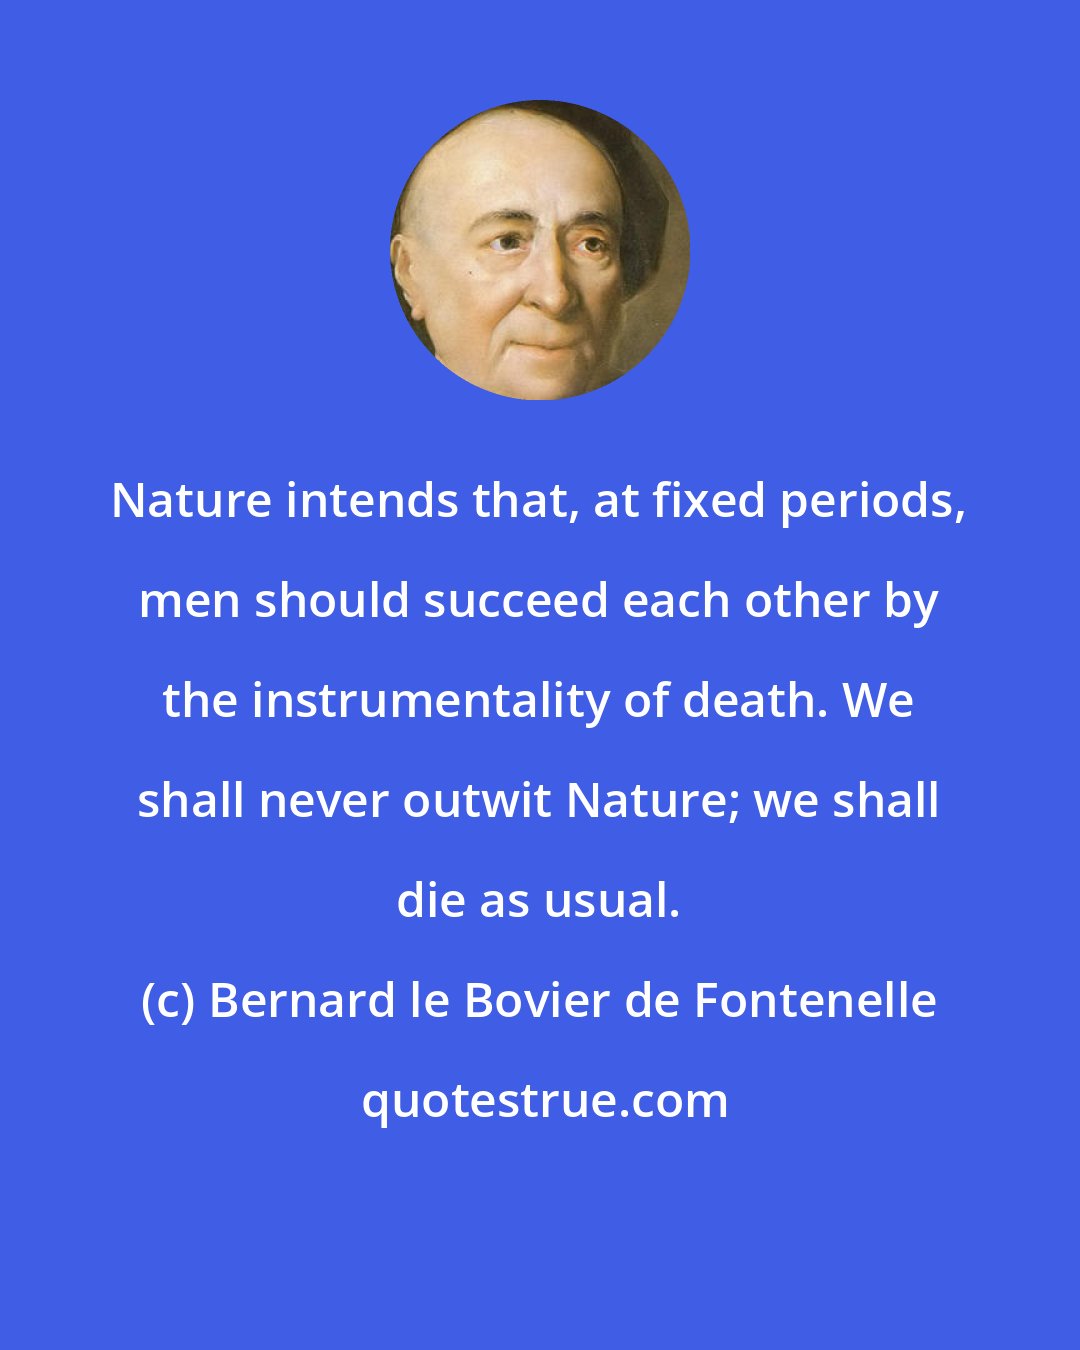 Bernard le Bovier de Fontenelle: Nature intends that, at fixed periods, men should succeed each other by the instrumentality of death. We shall never outwit Nature; we shall die as usual.